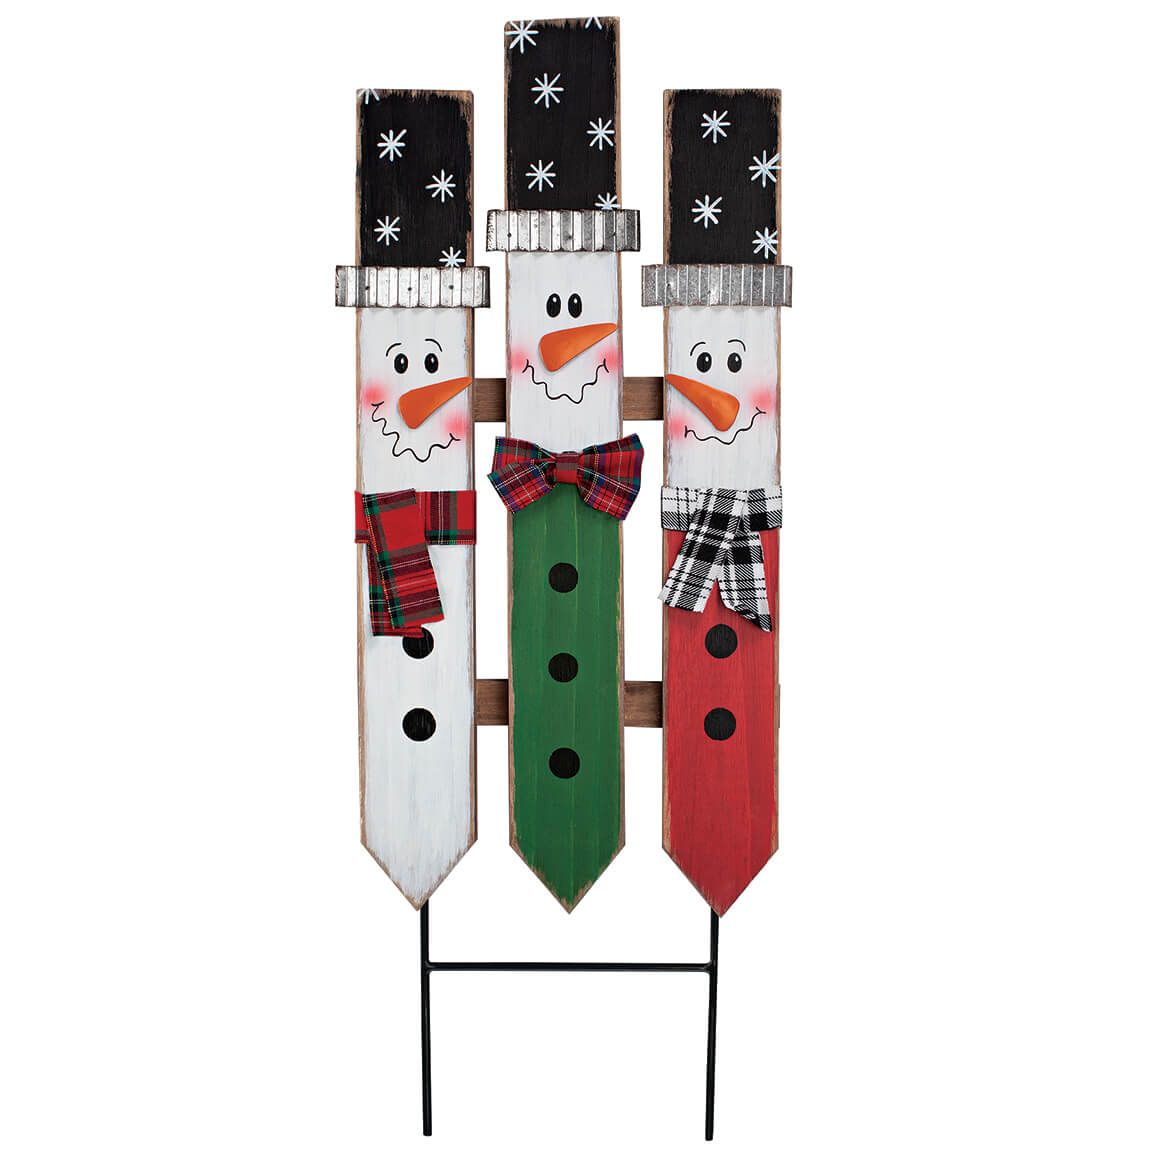 Snowman Fence Yard Stake by Fox River™ Creations + '-' + 369642